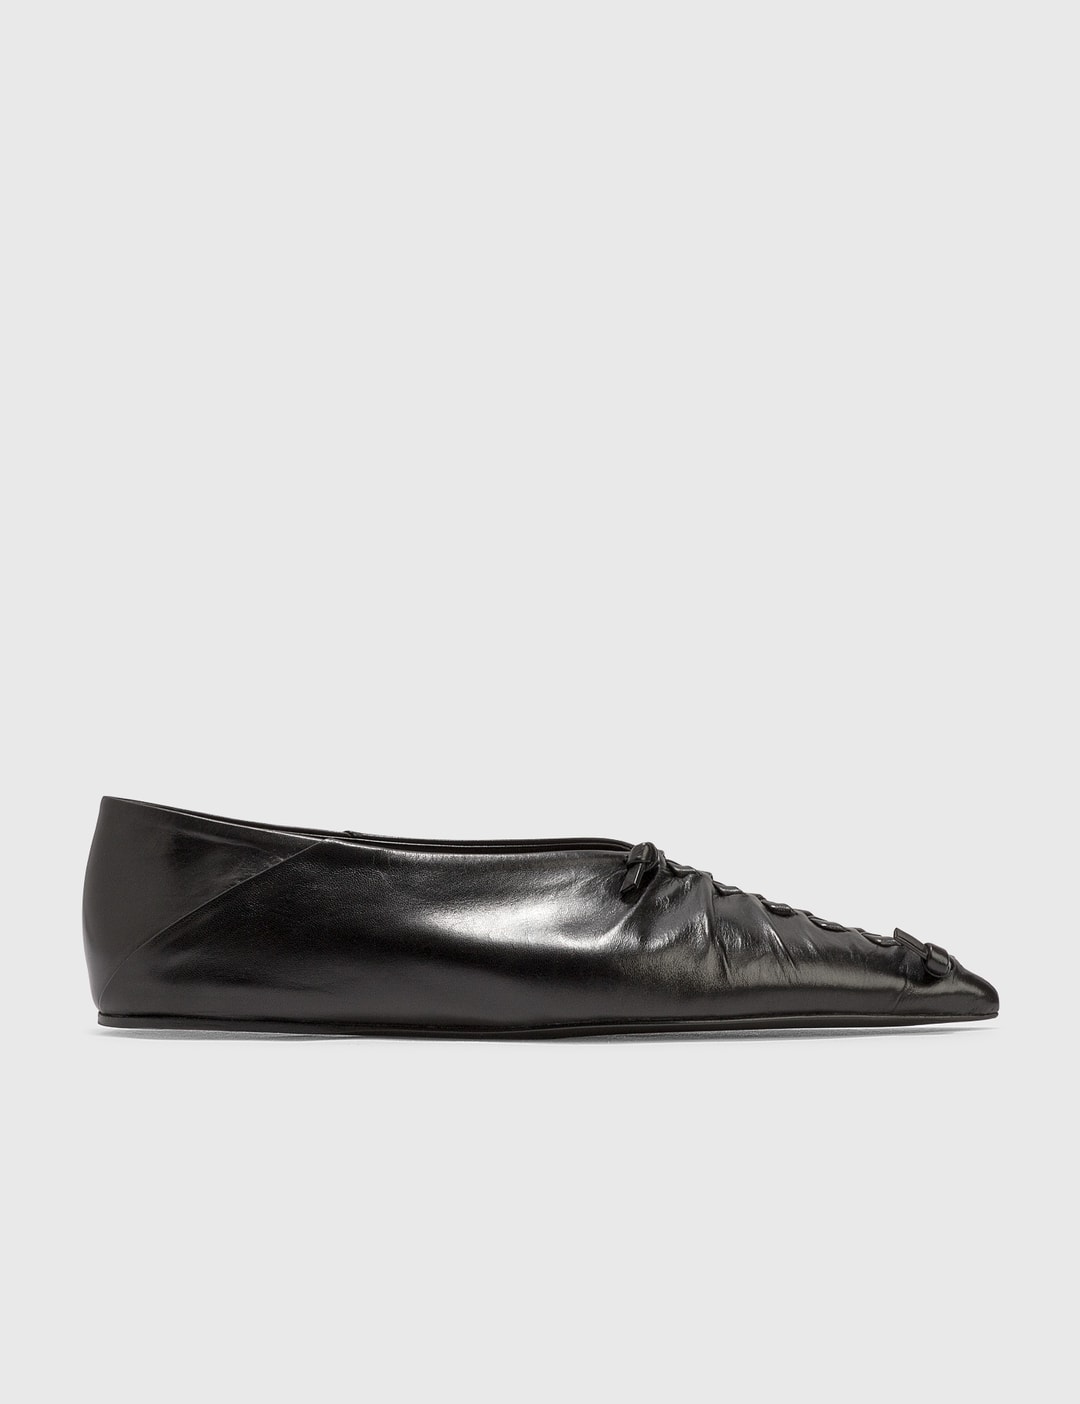 Jil Sander - Ballerinas | HBX - Globally Curated Fashion and Lifestyle ...